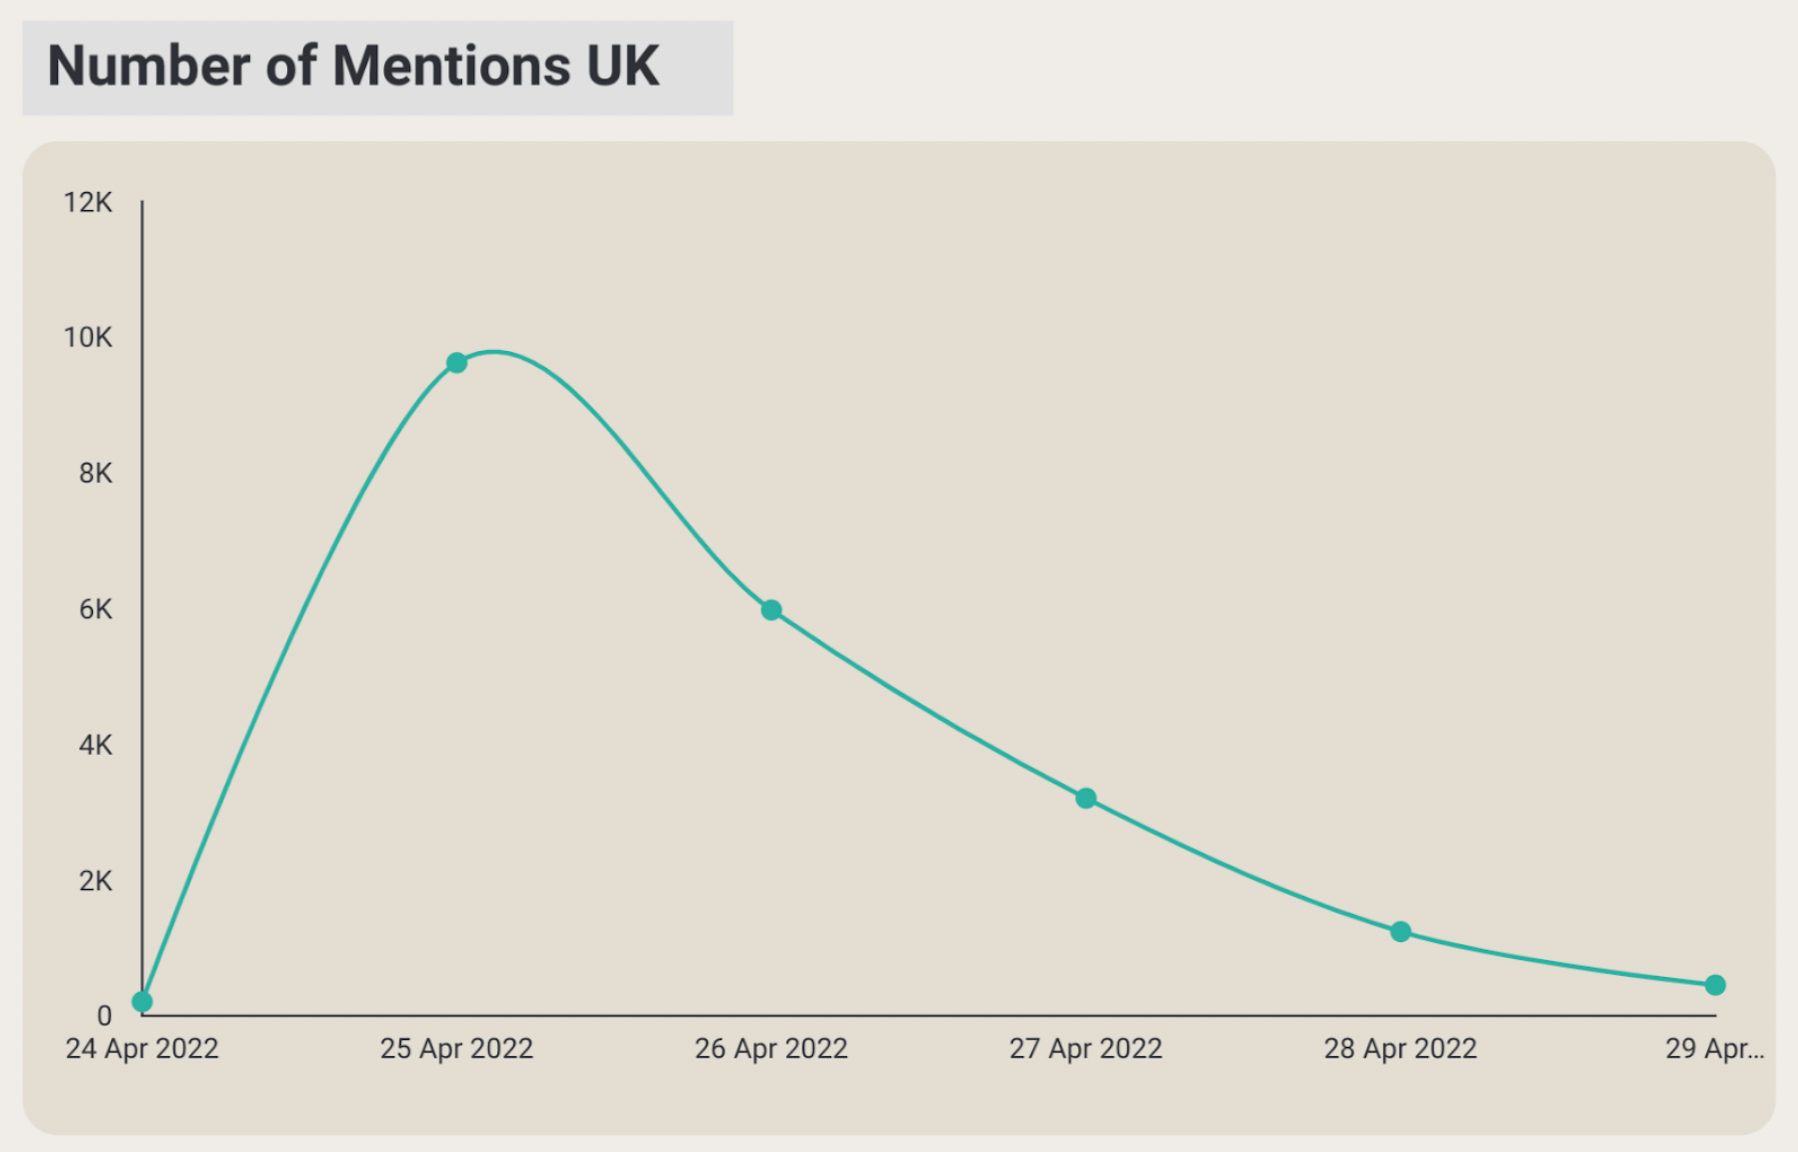 Figure 2: Total number of mentions in the UK per 1M users.